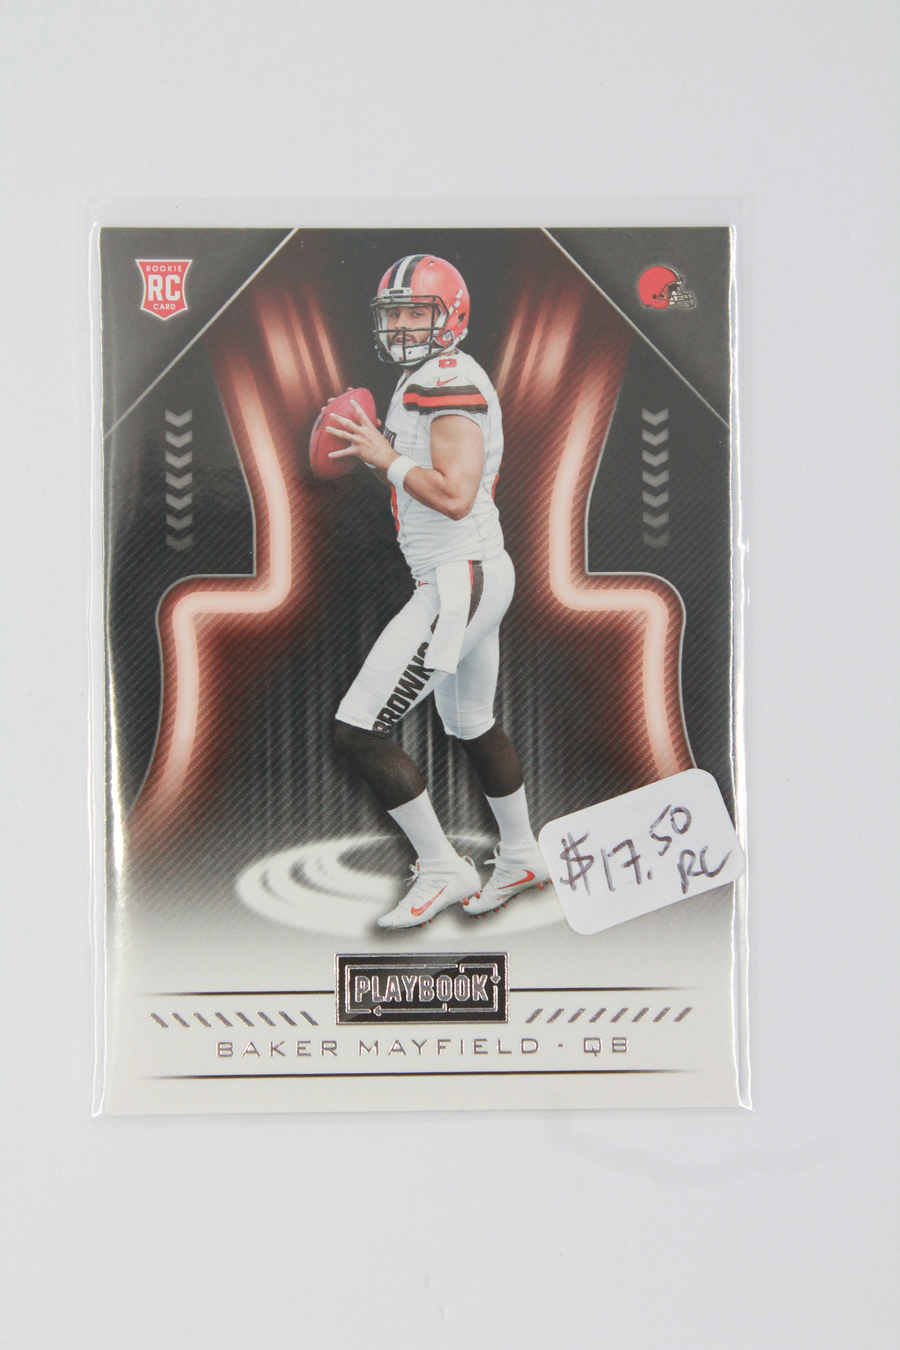 Baker Mayfield 2018 Panini Playbook Rookie Card